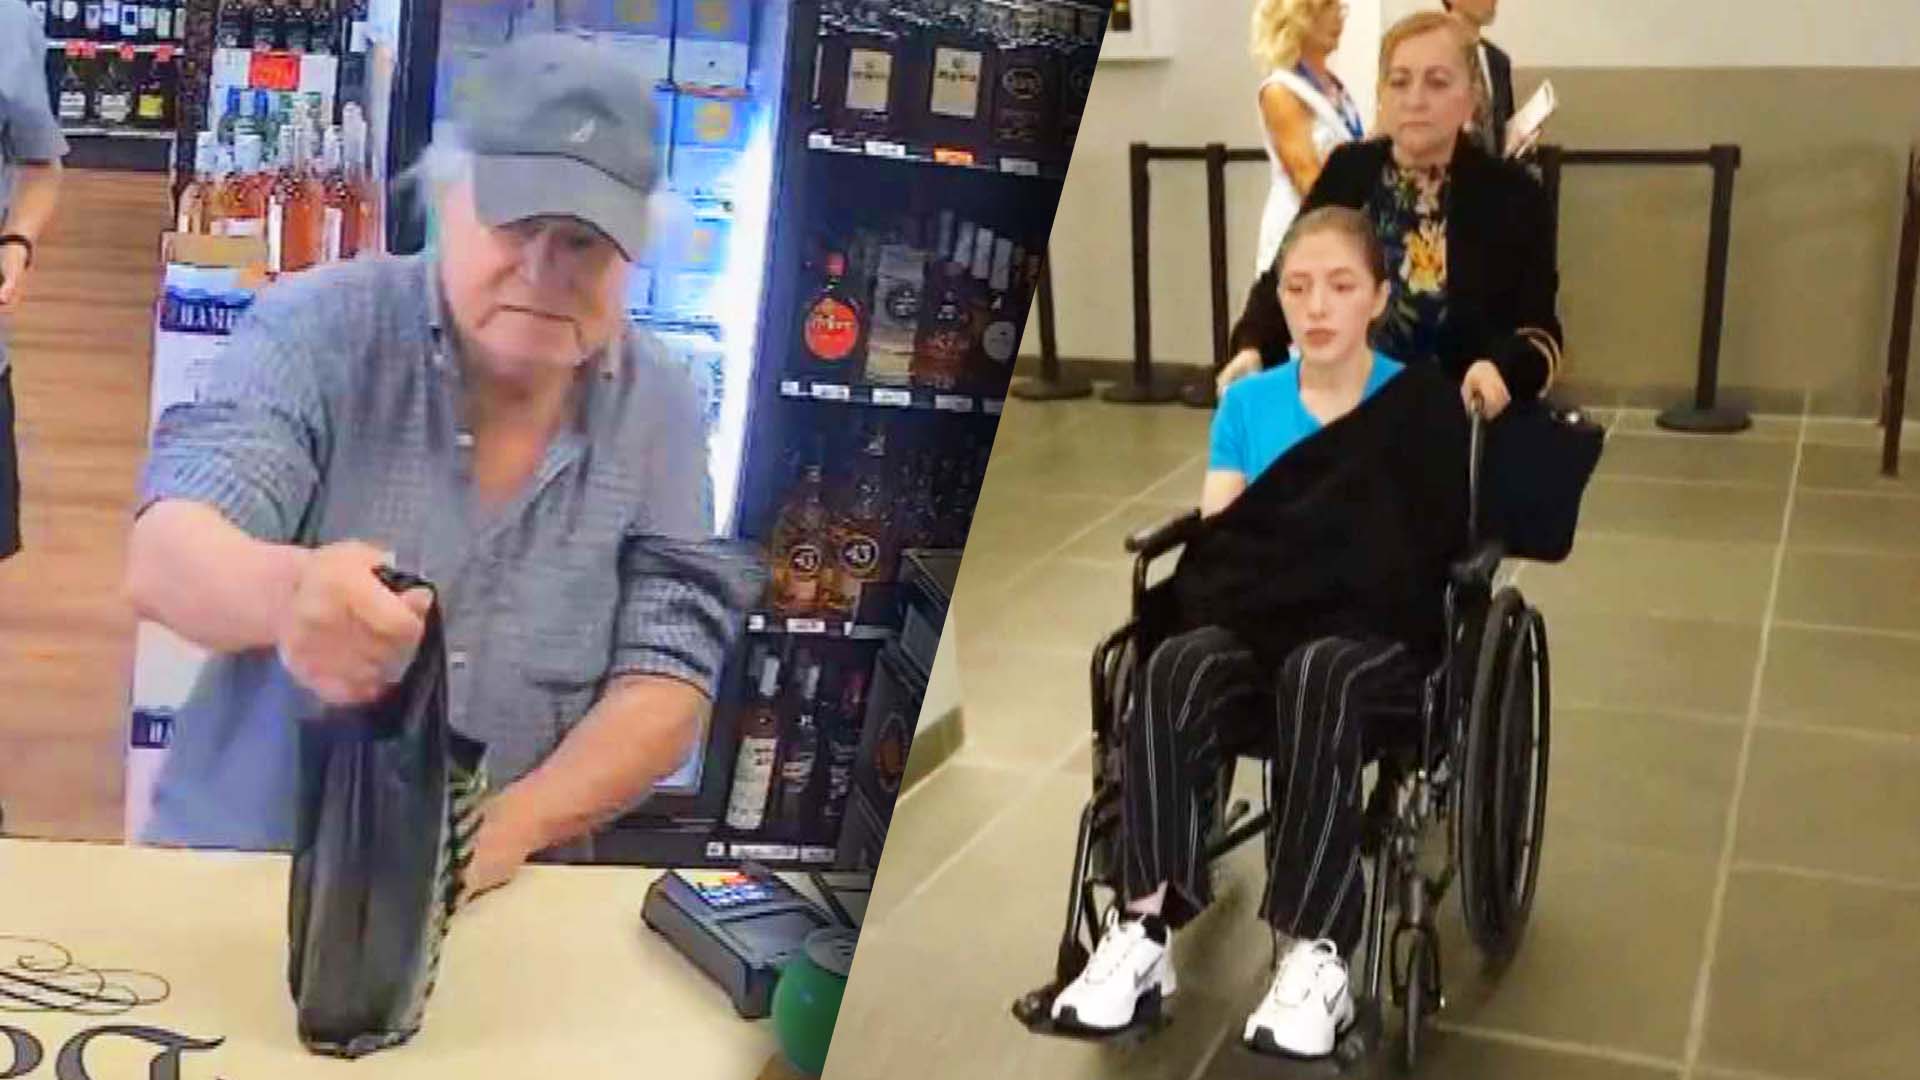 Man grabbing a bag at a liquor store counter / victim being pushed in a wheelchair